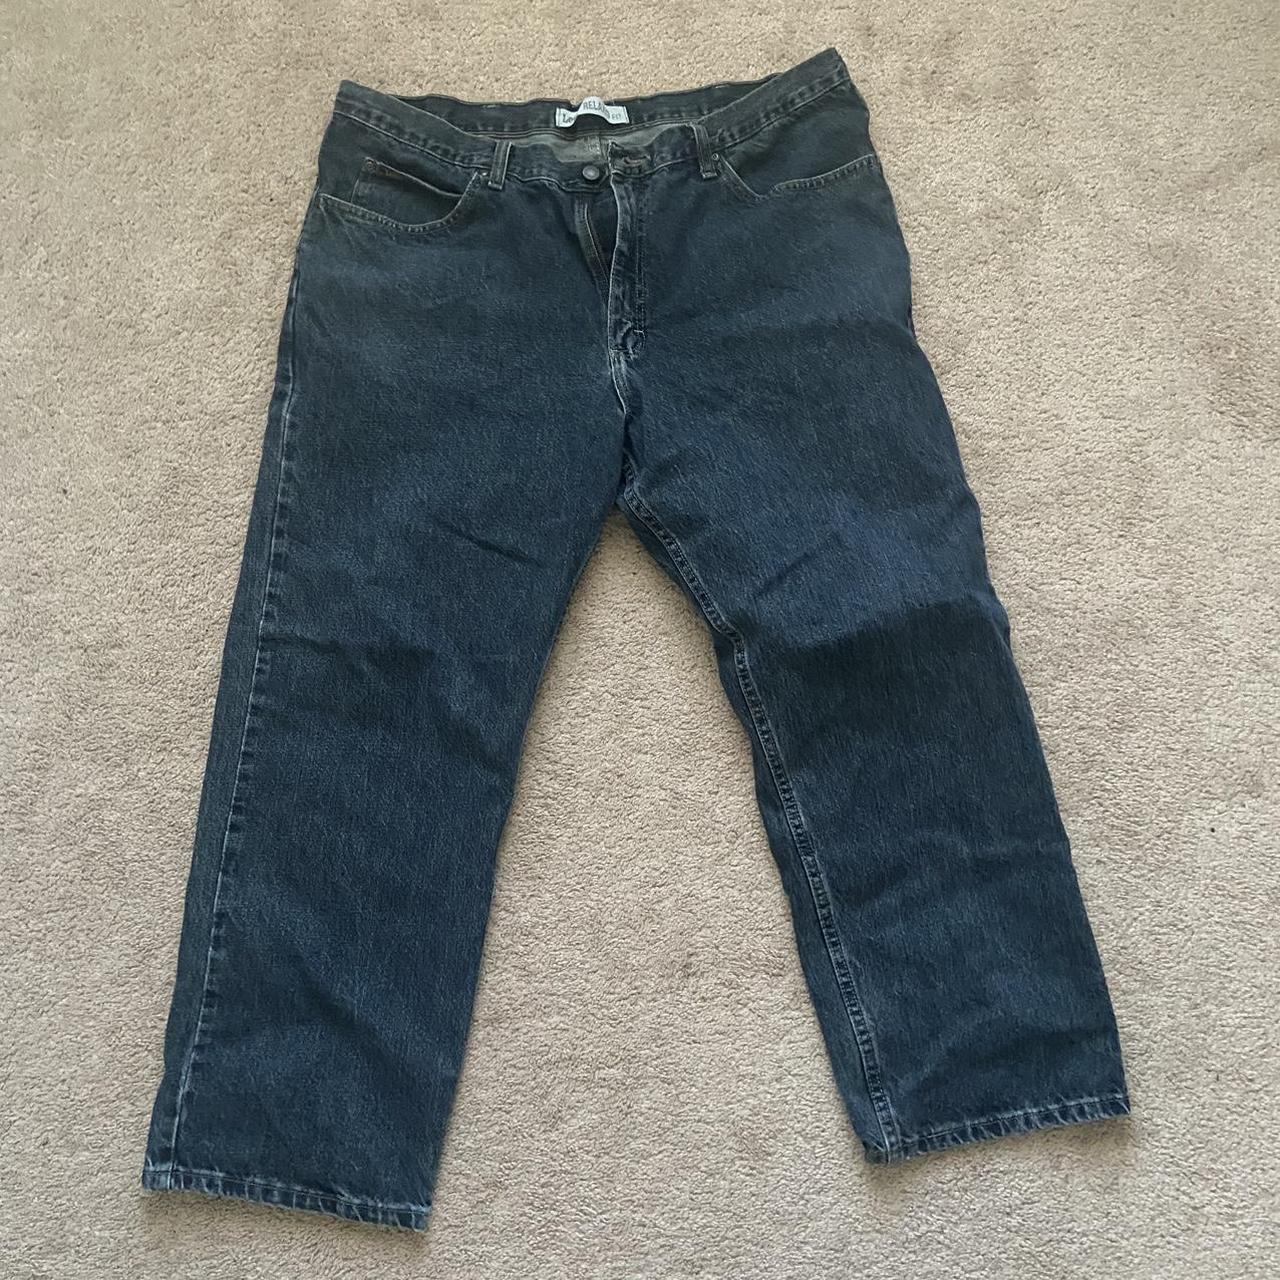 Lee Jeans Relaxed Fit 42x29 - Depop